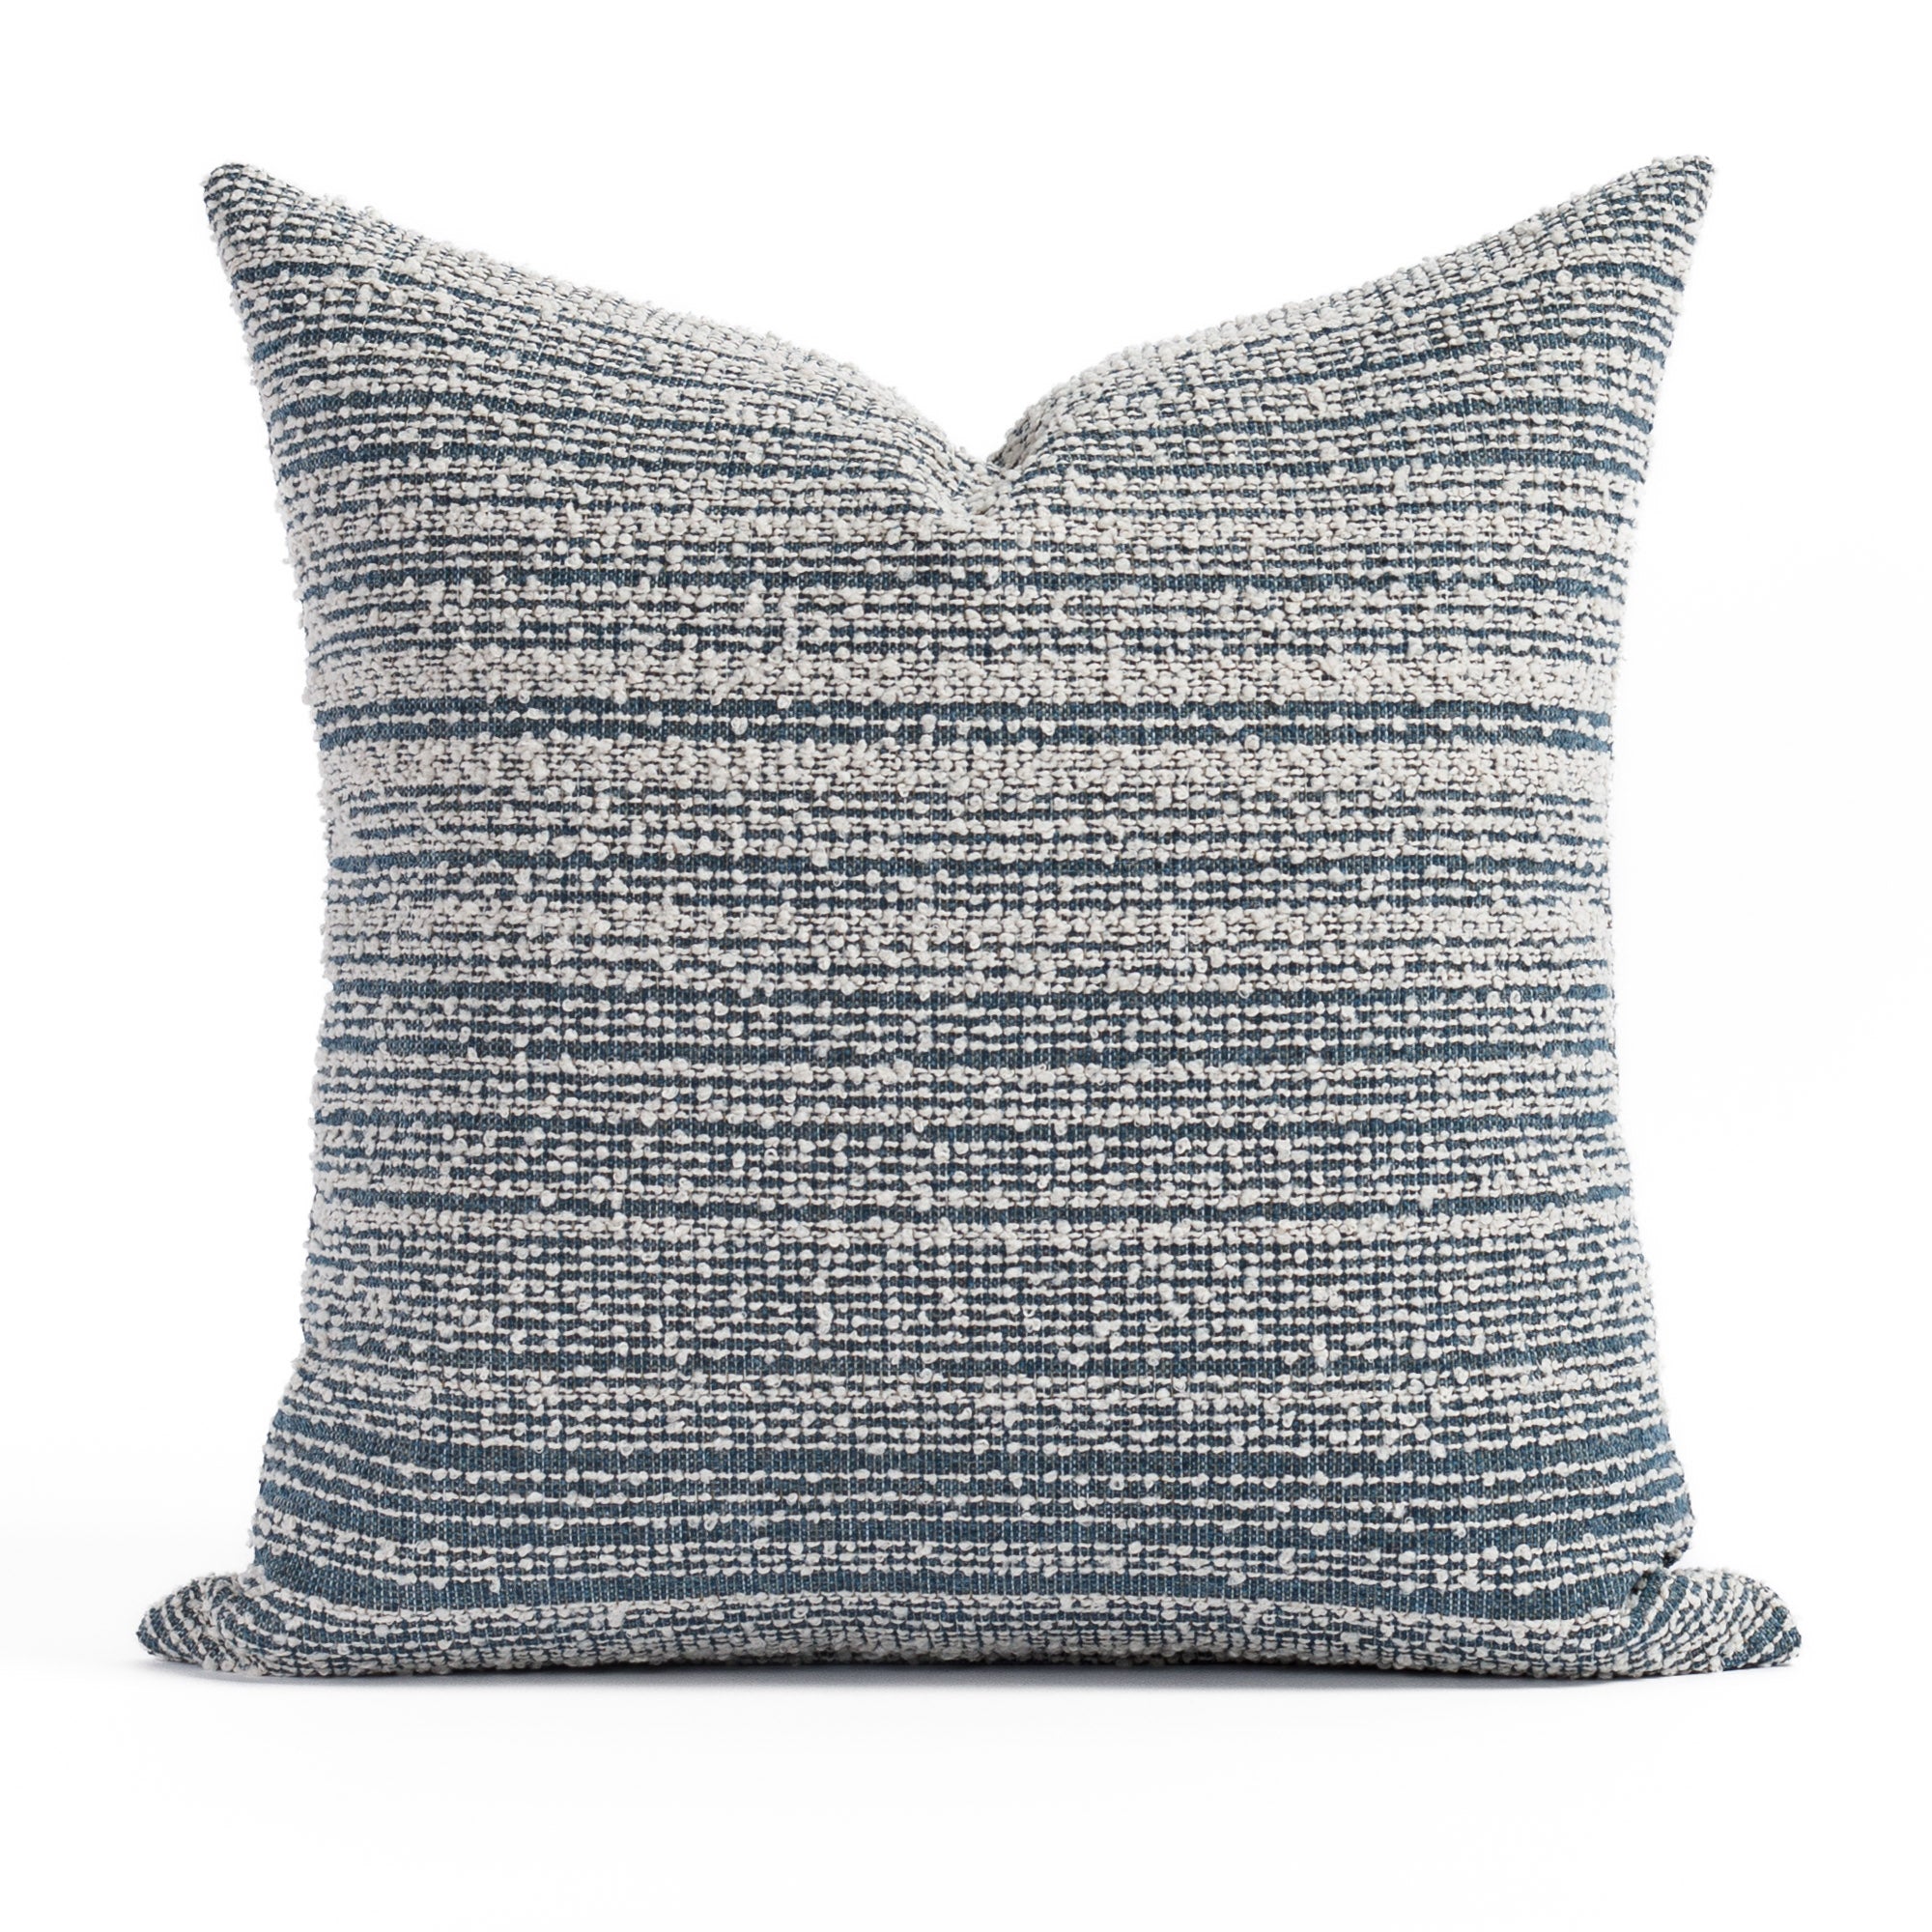 Kos 20x20 Pillow Chambray, a blue and white loopy striped Tonic Living pillow